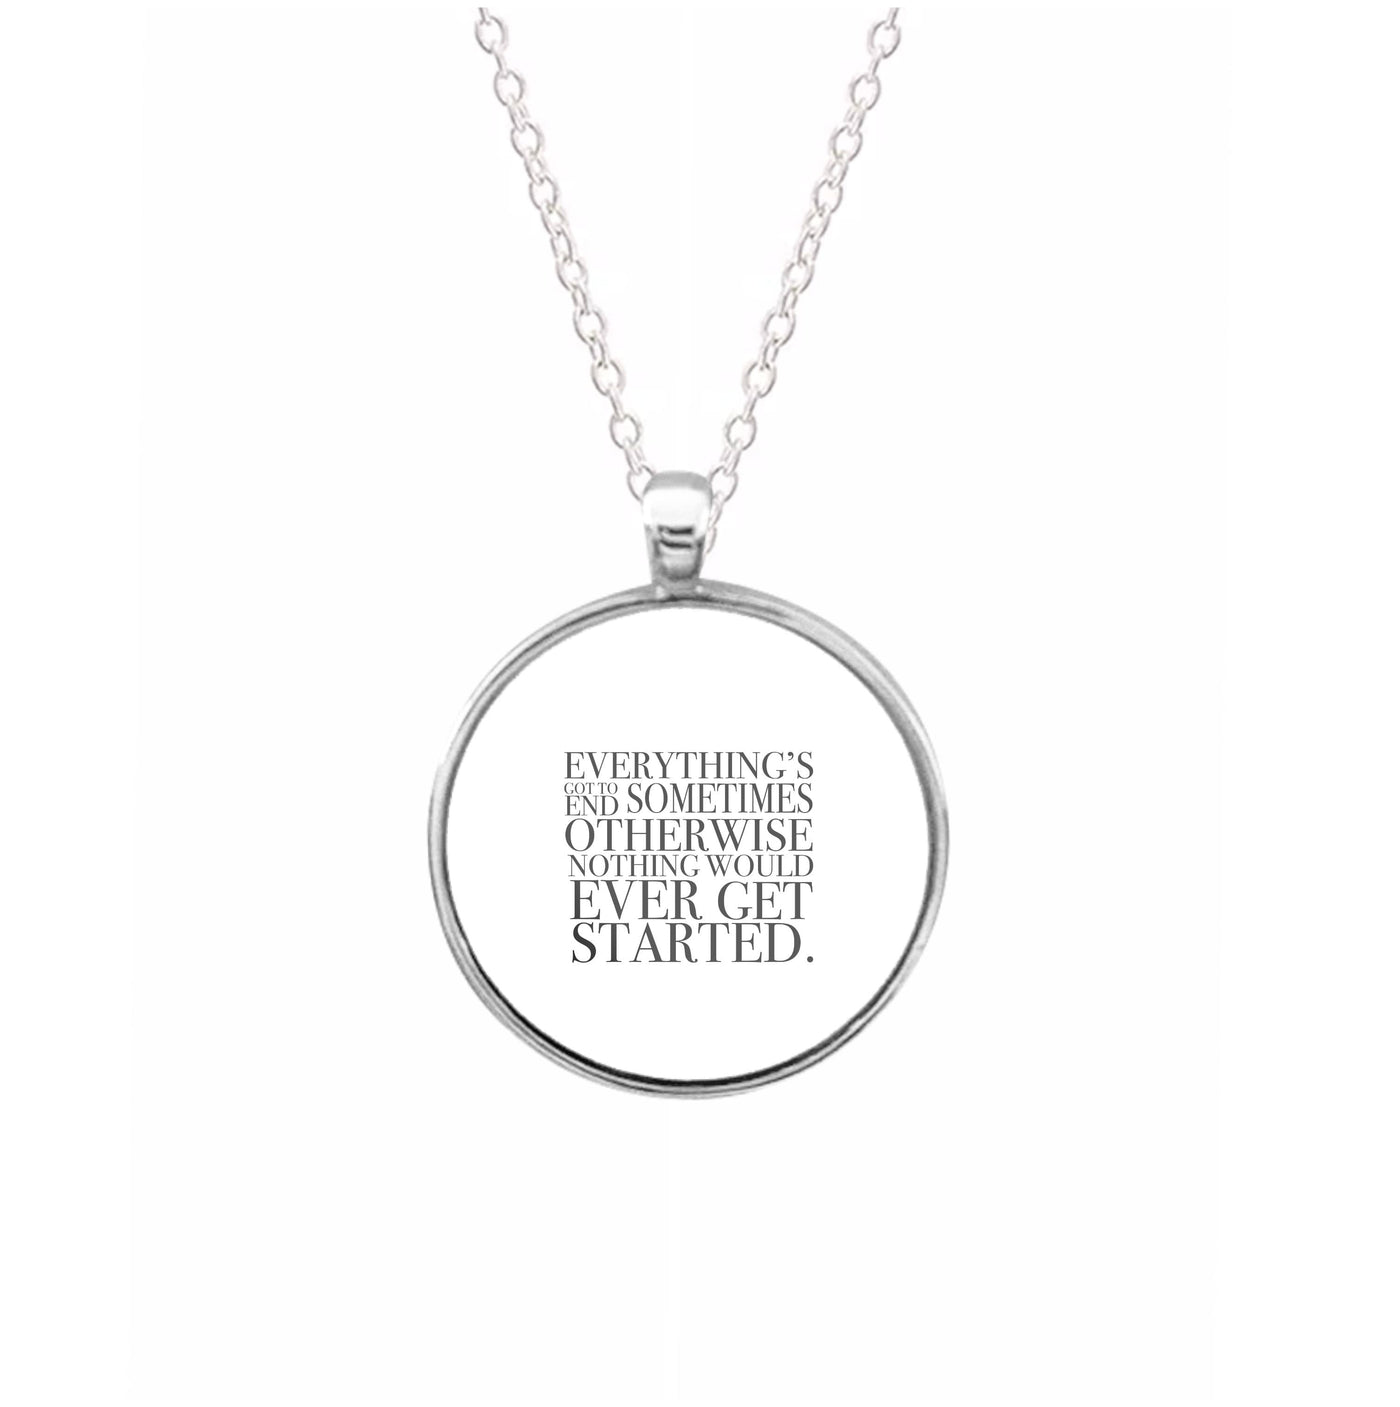 Everything's Got To End Sometimes - Doctor Who Necklace